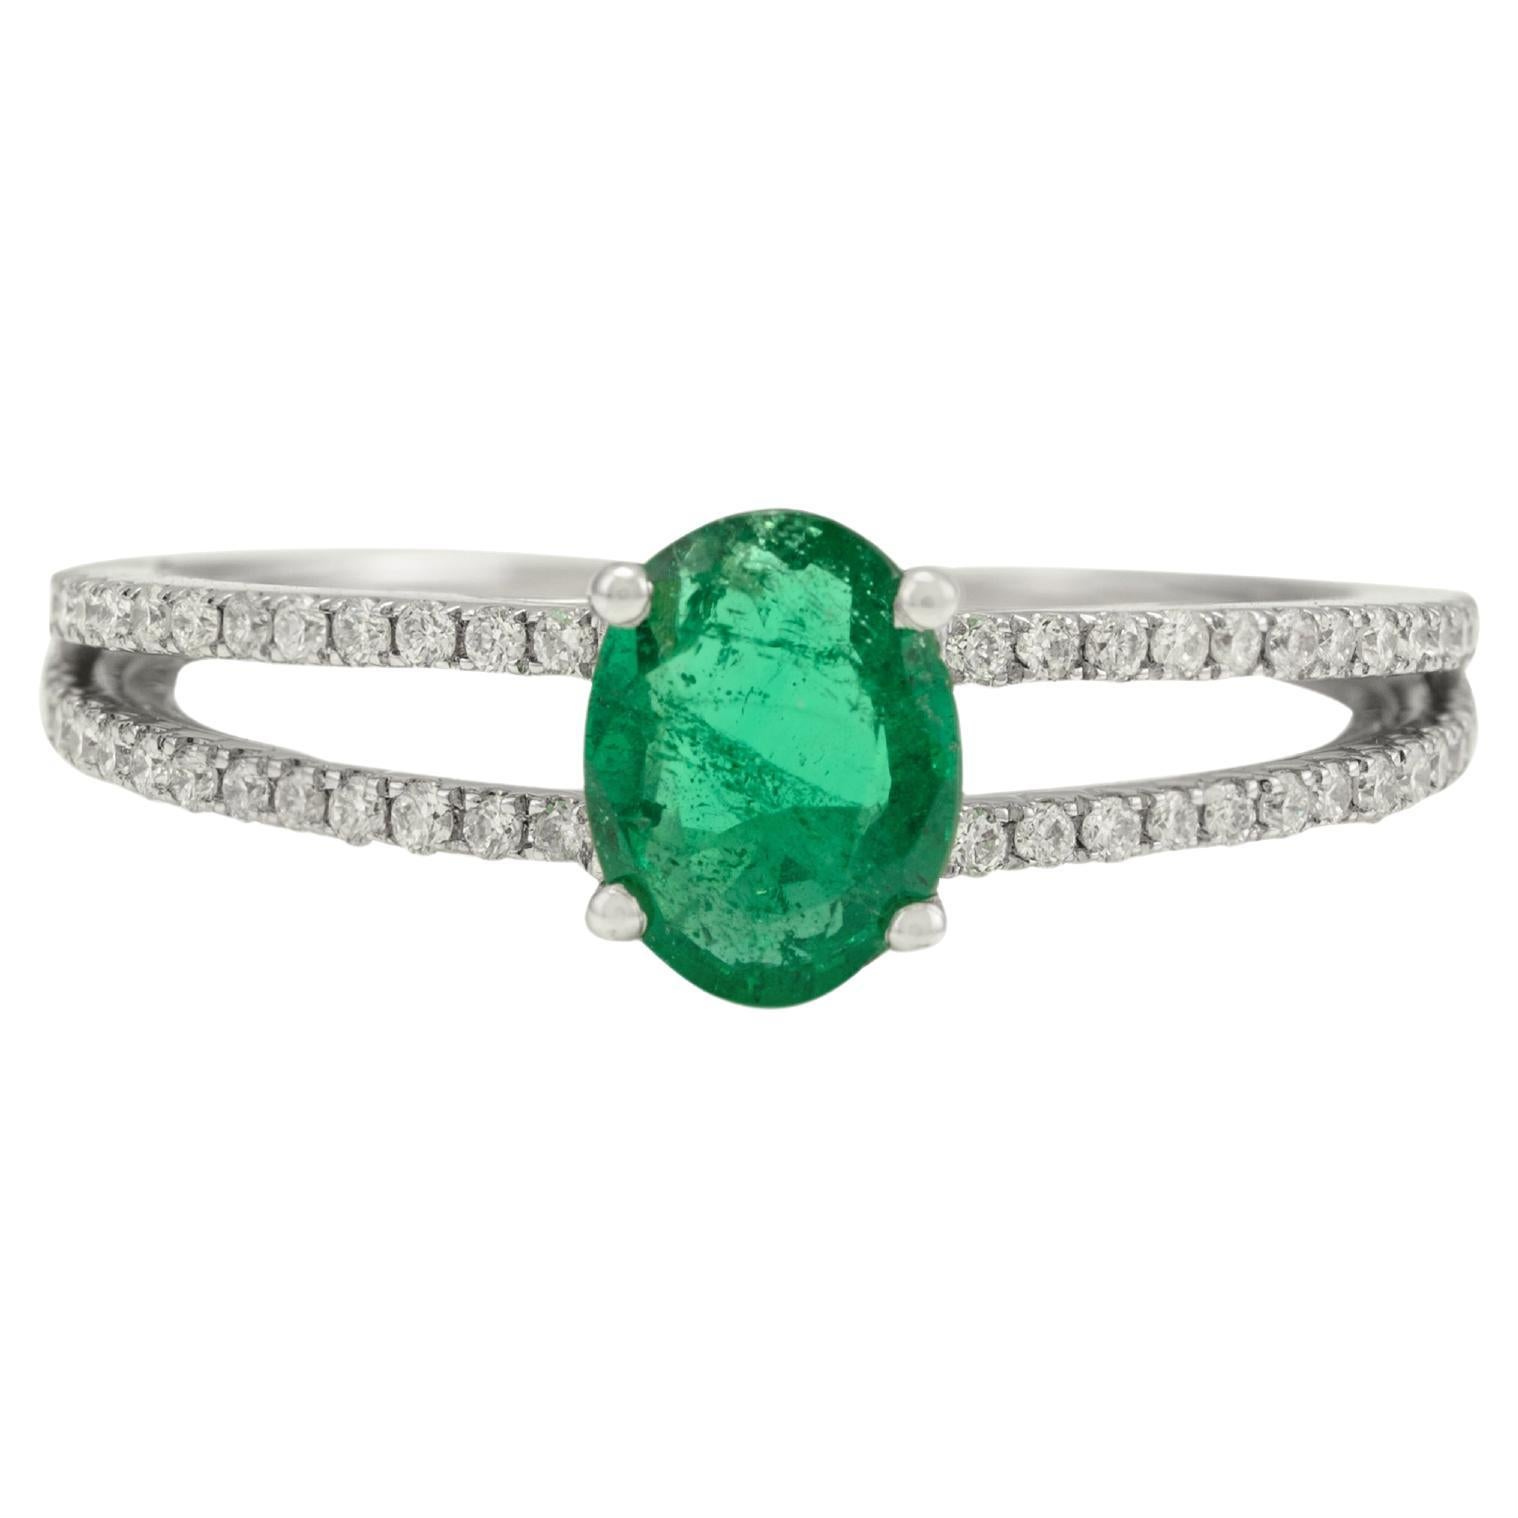 Genuine Oval Cut Emerald and Diamond Ring in Solid 18k White Gold